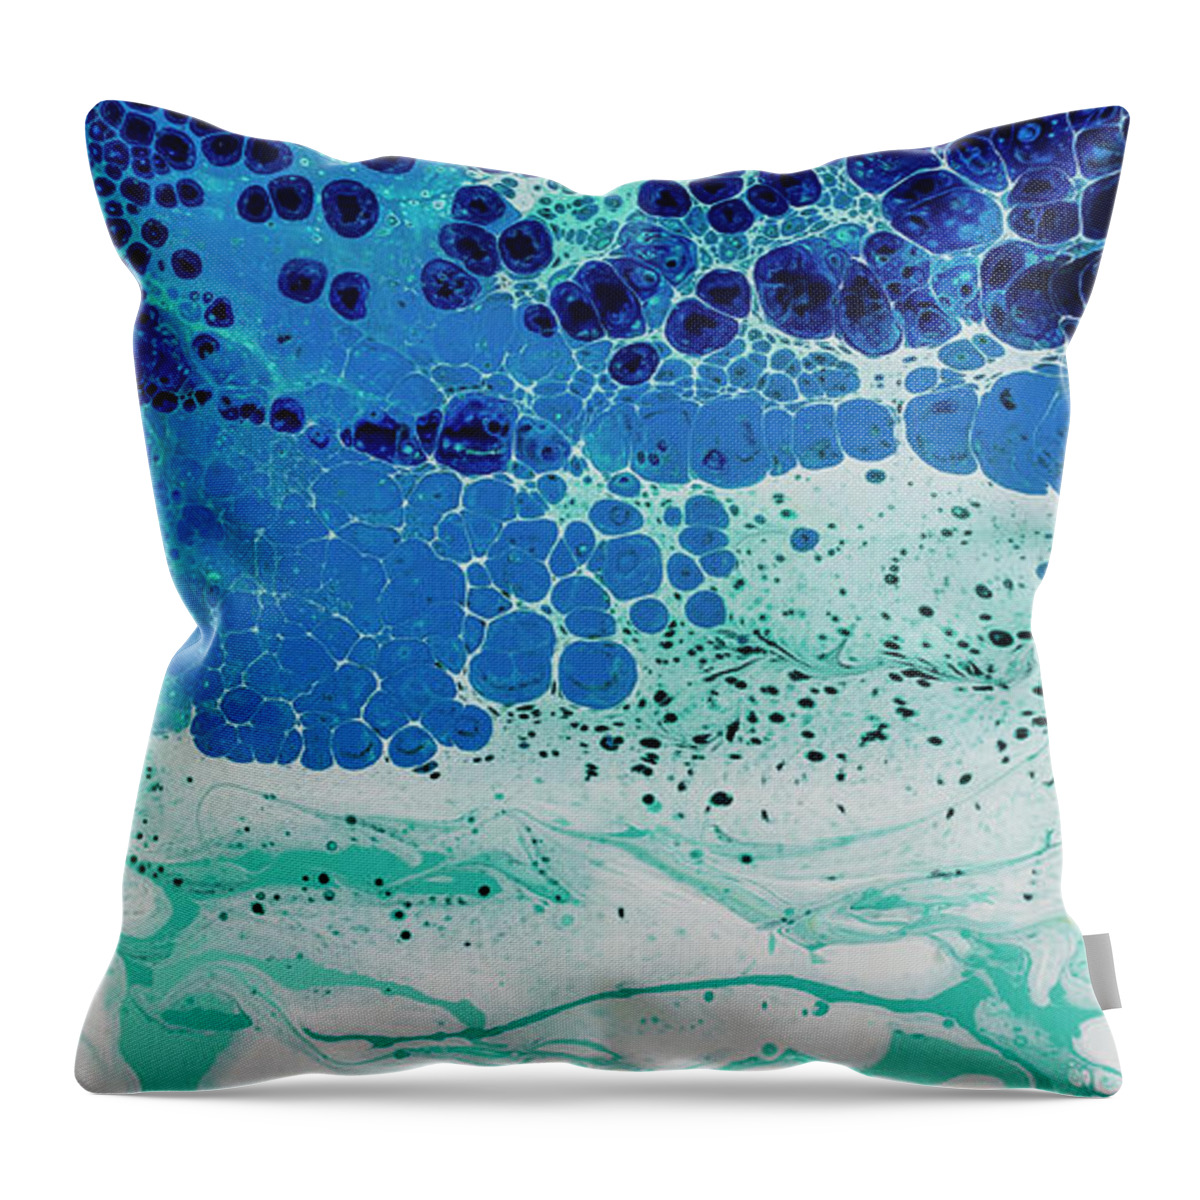 Starfish Throw Pillow featuring the painting Starfish By The Sea by Darice Machel McGuire